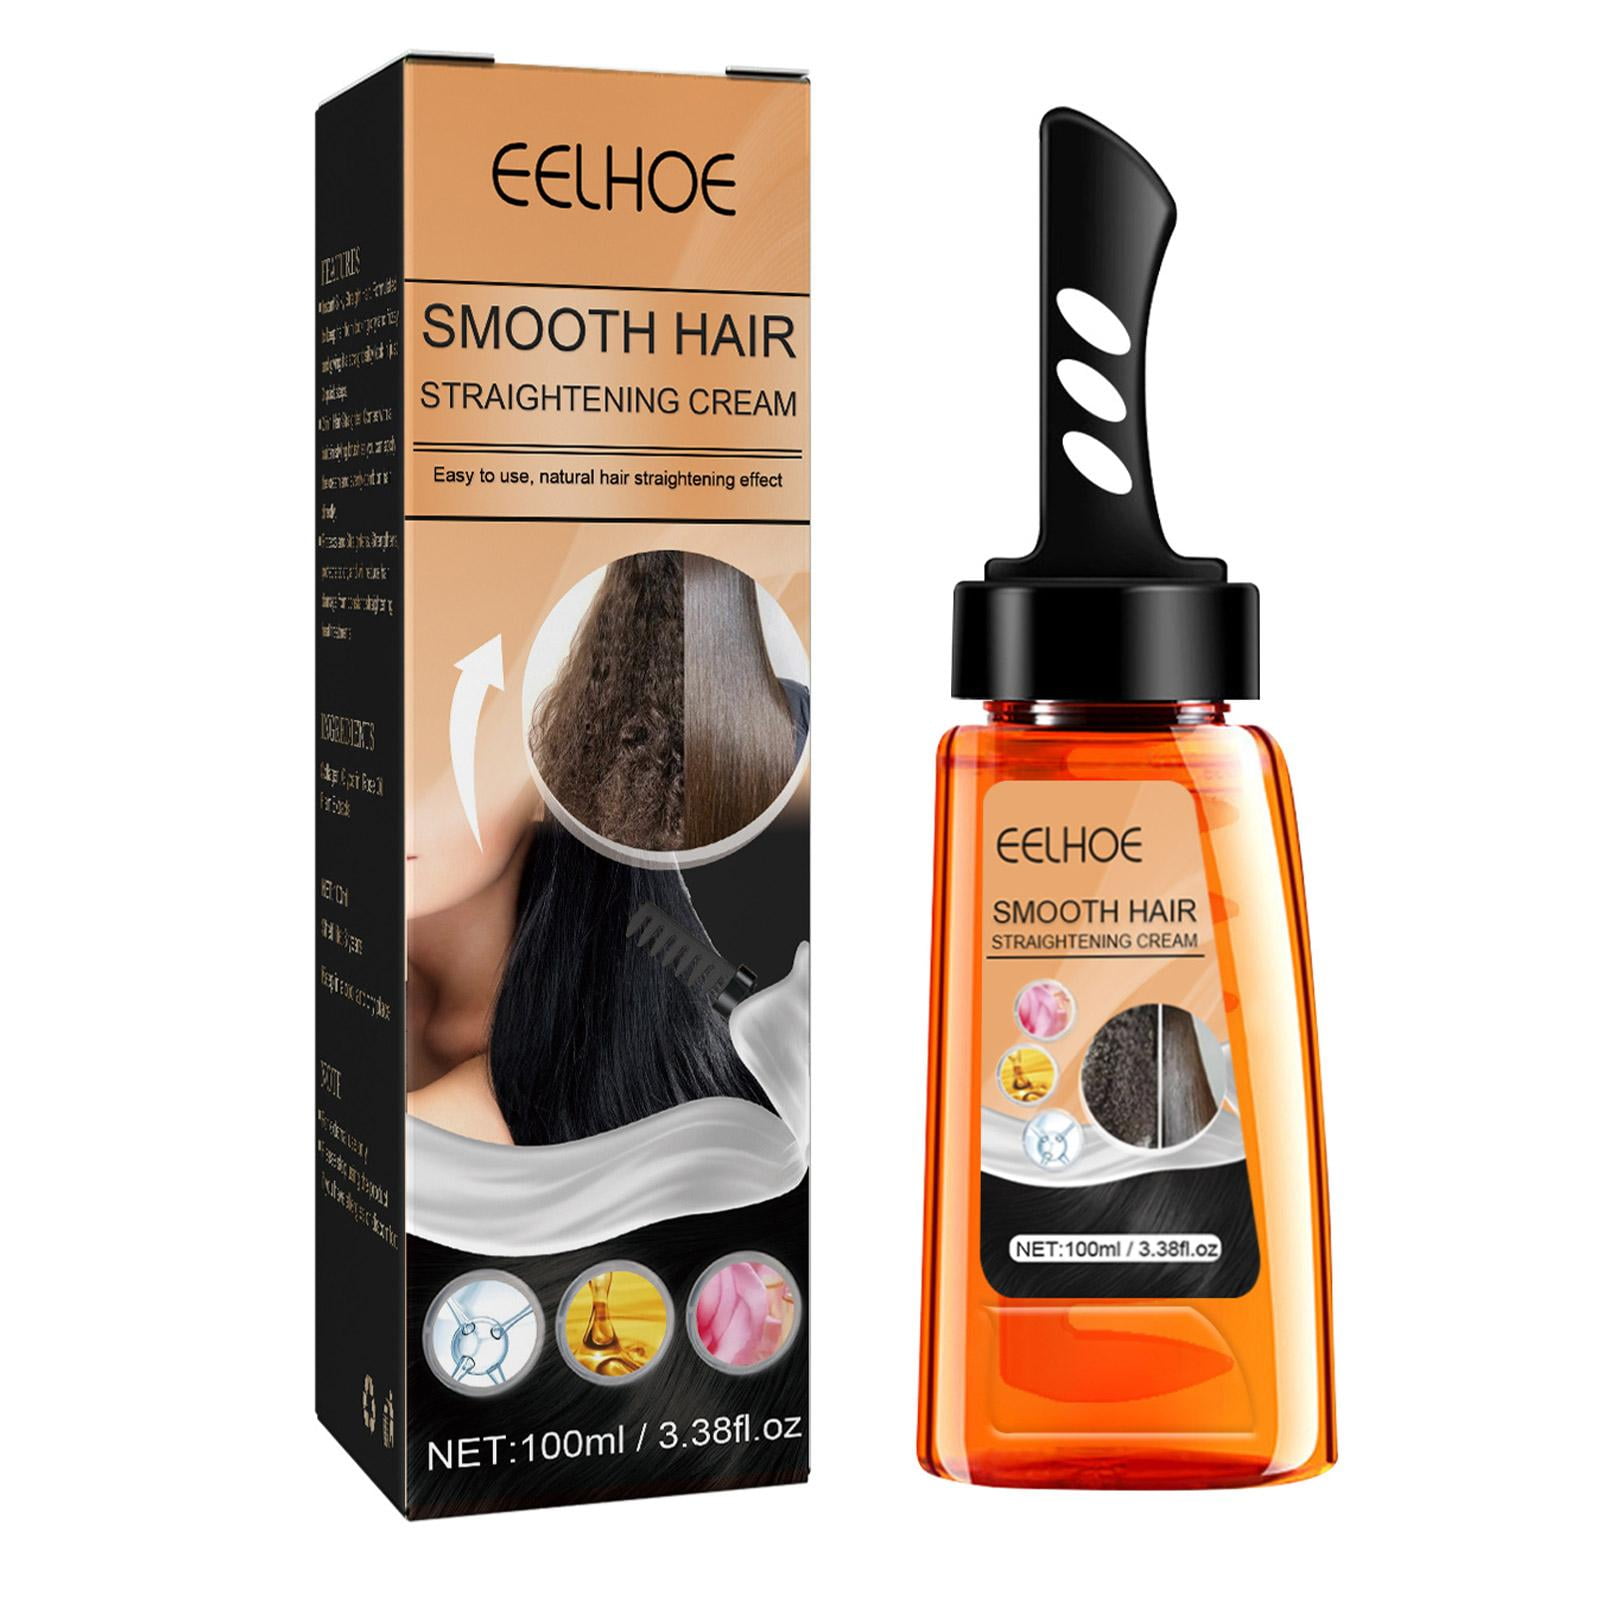 Straight Hair Cream | Smooth Hair Balm for Dry Hair | Curly Hair  Straightener Treat with Comb Moisturises, Nourishes, and Boosts Movement  and Shine for A Naturally Straight Look 